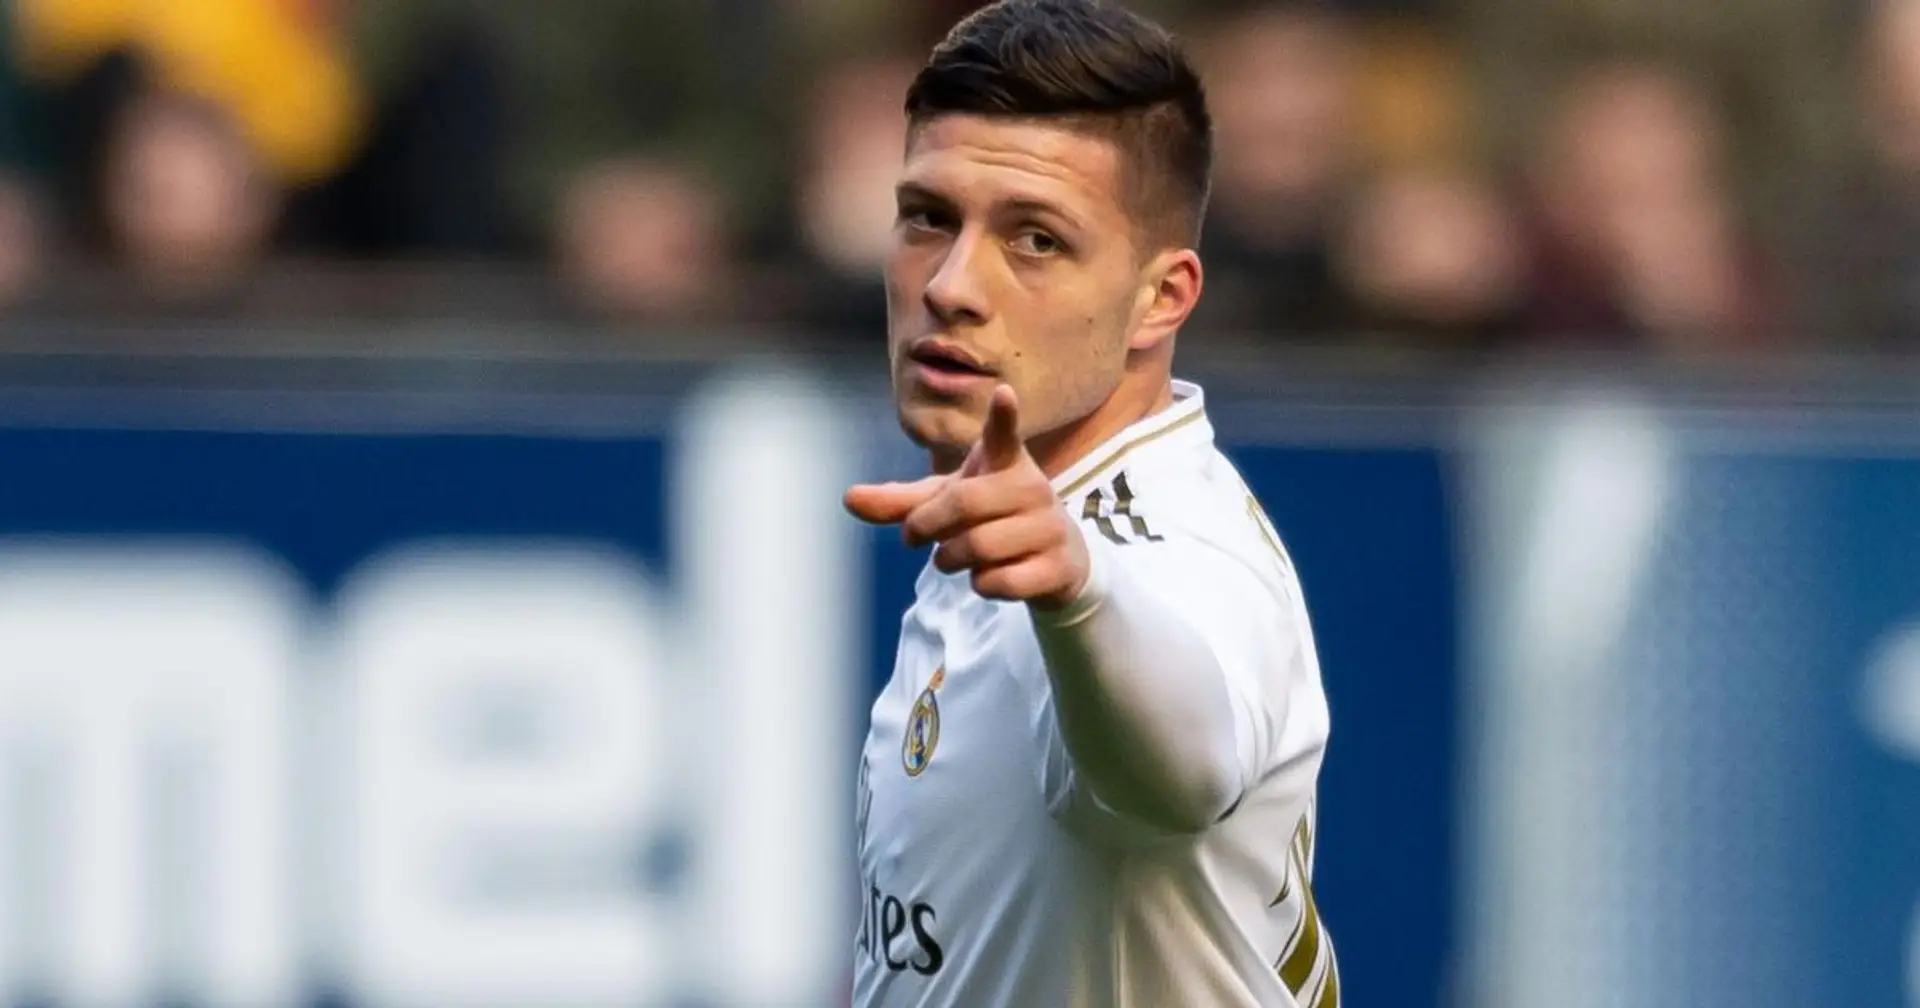 'Failure is not an option for me': Jovic eager to prove himself at Real Madrid